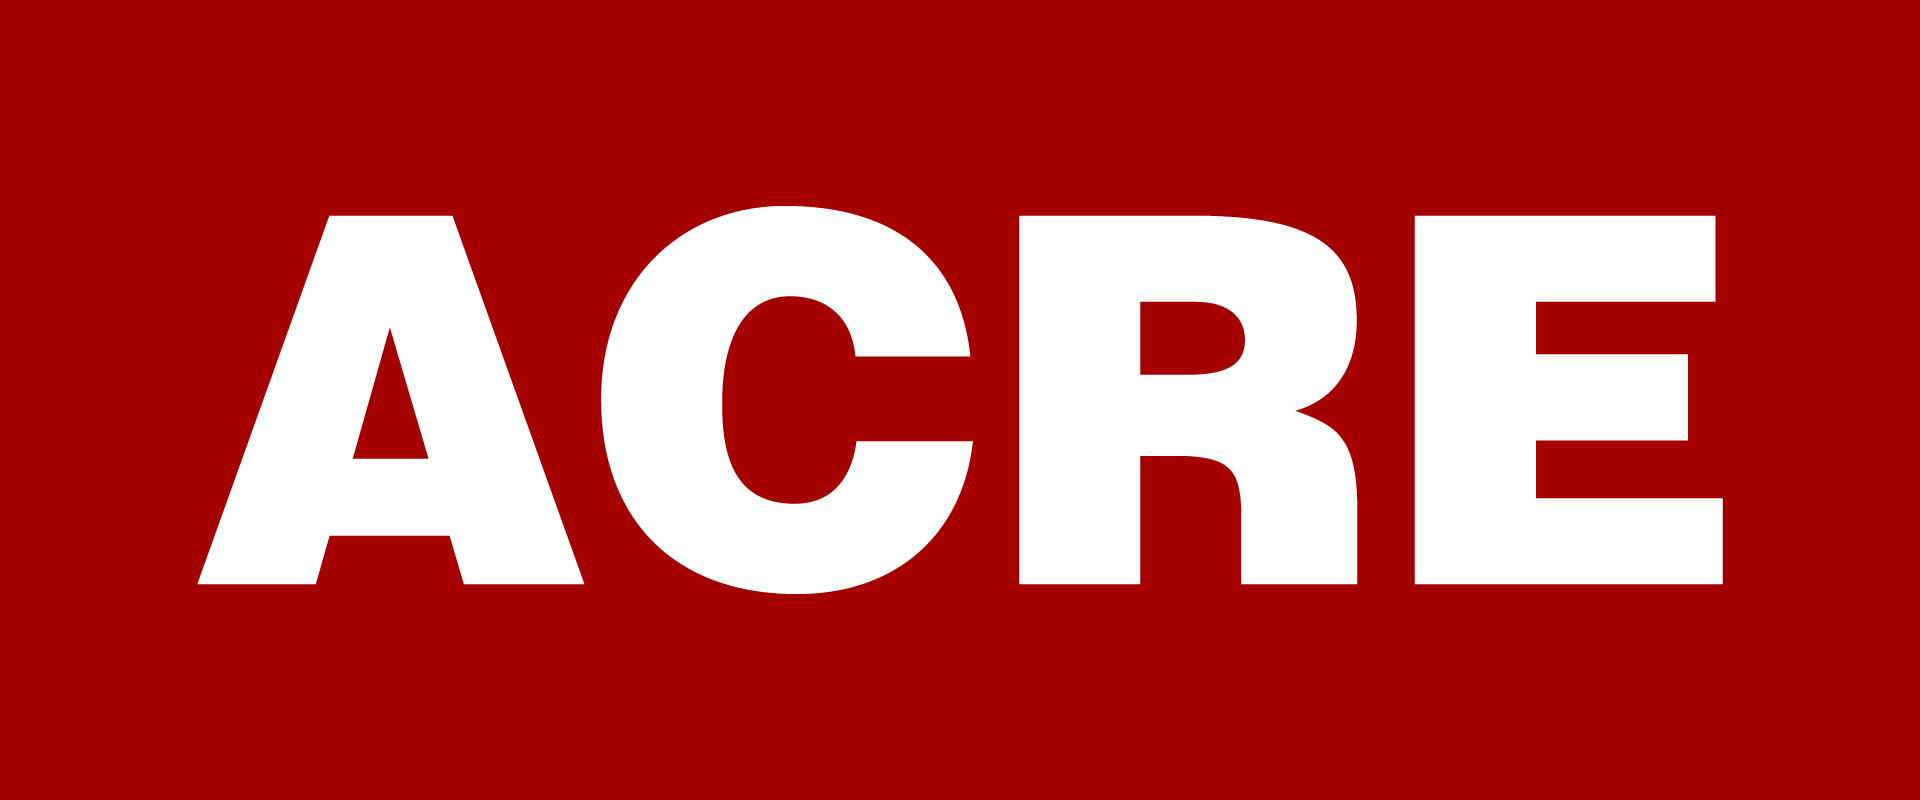 ACRE_logo_fix_red_n.png